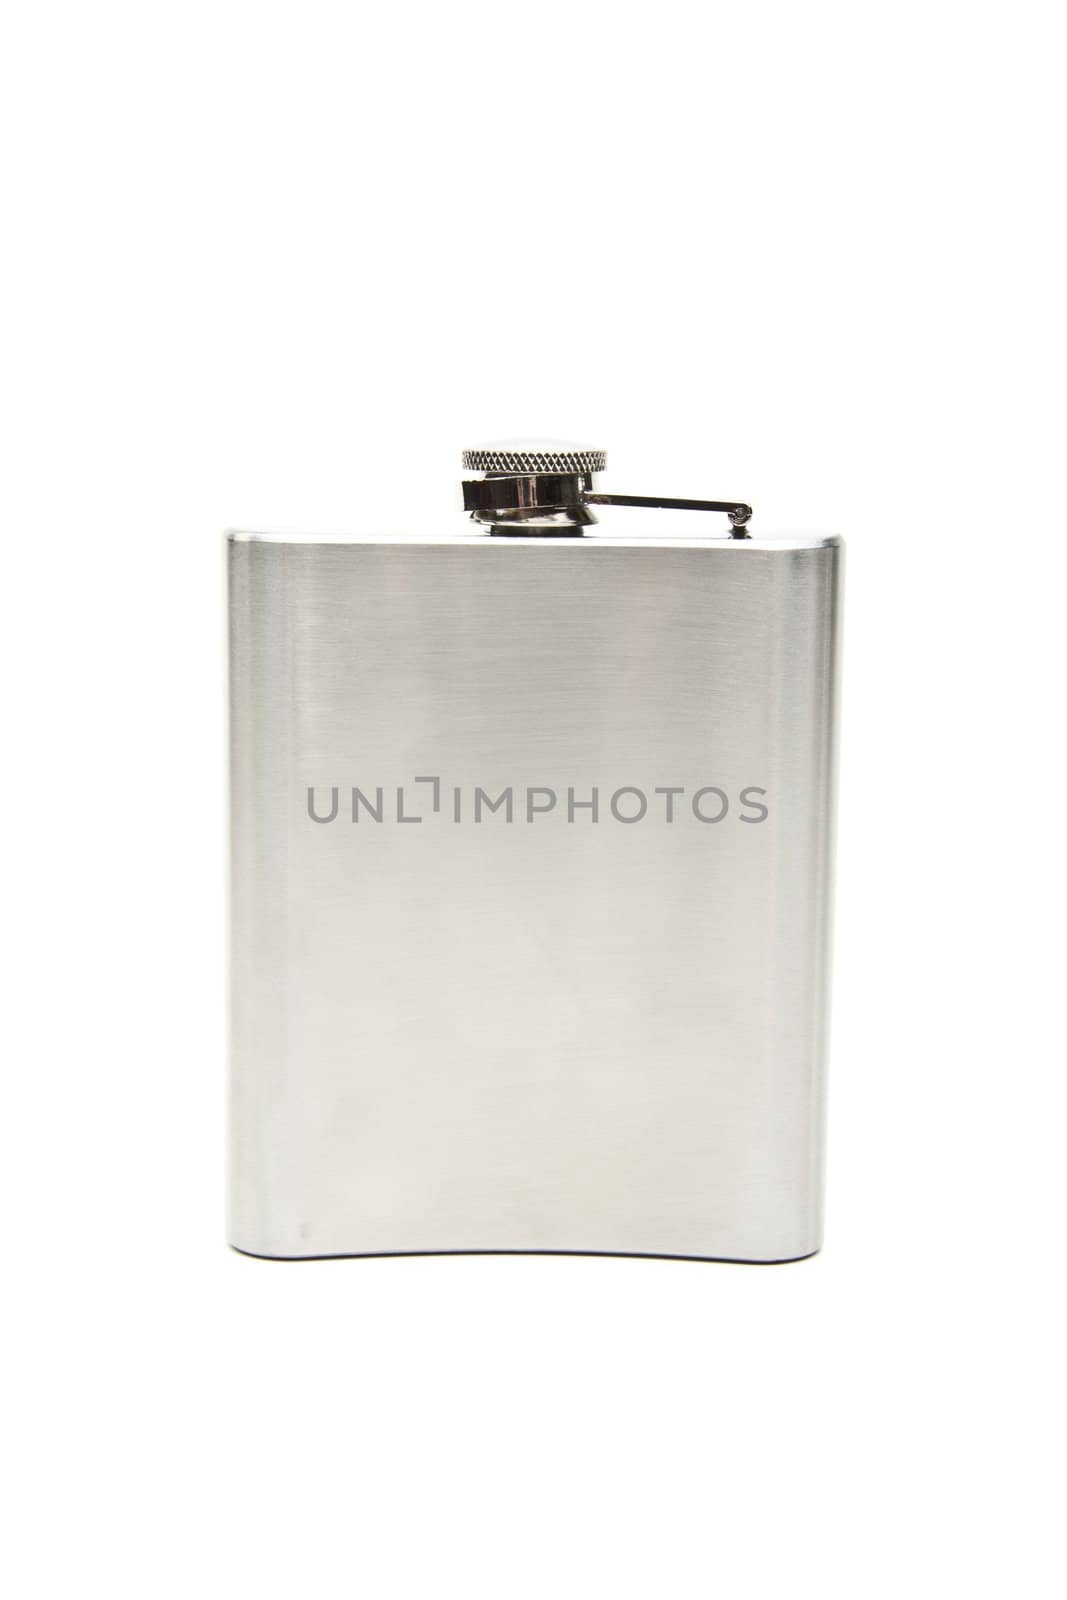 Stainless hip flask isolated